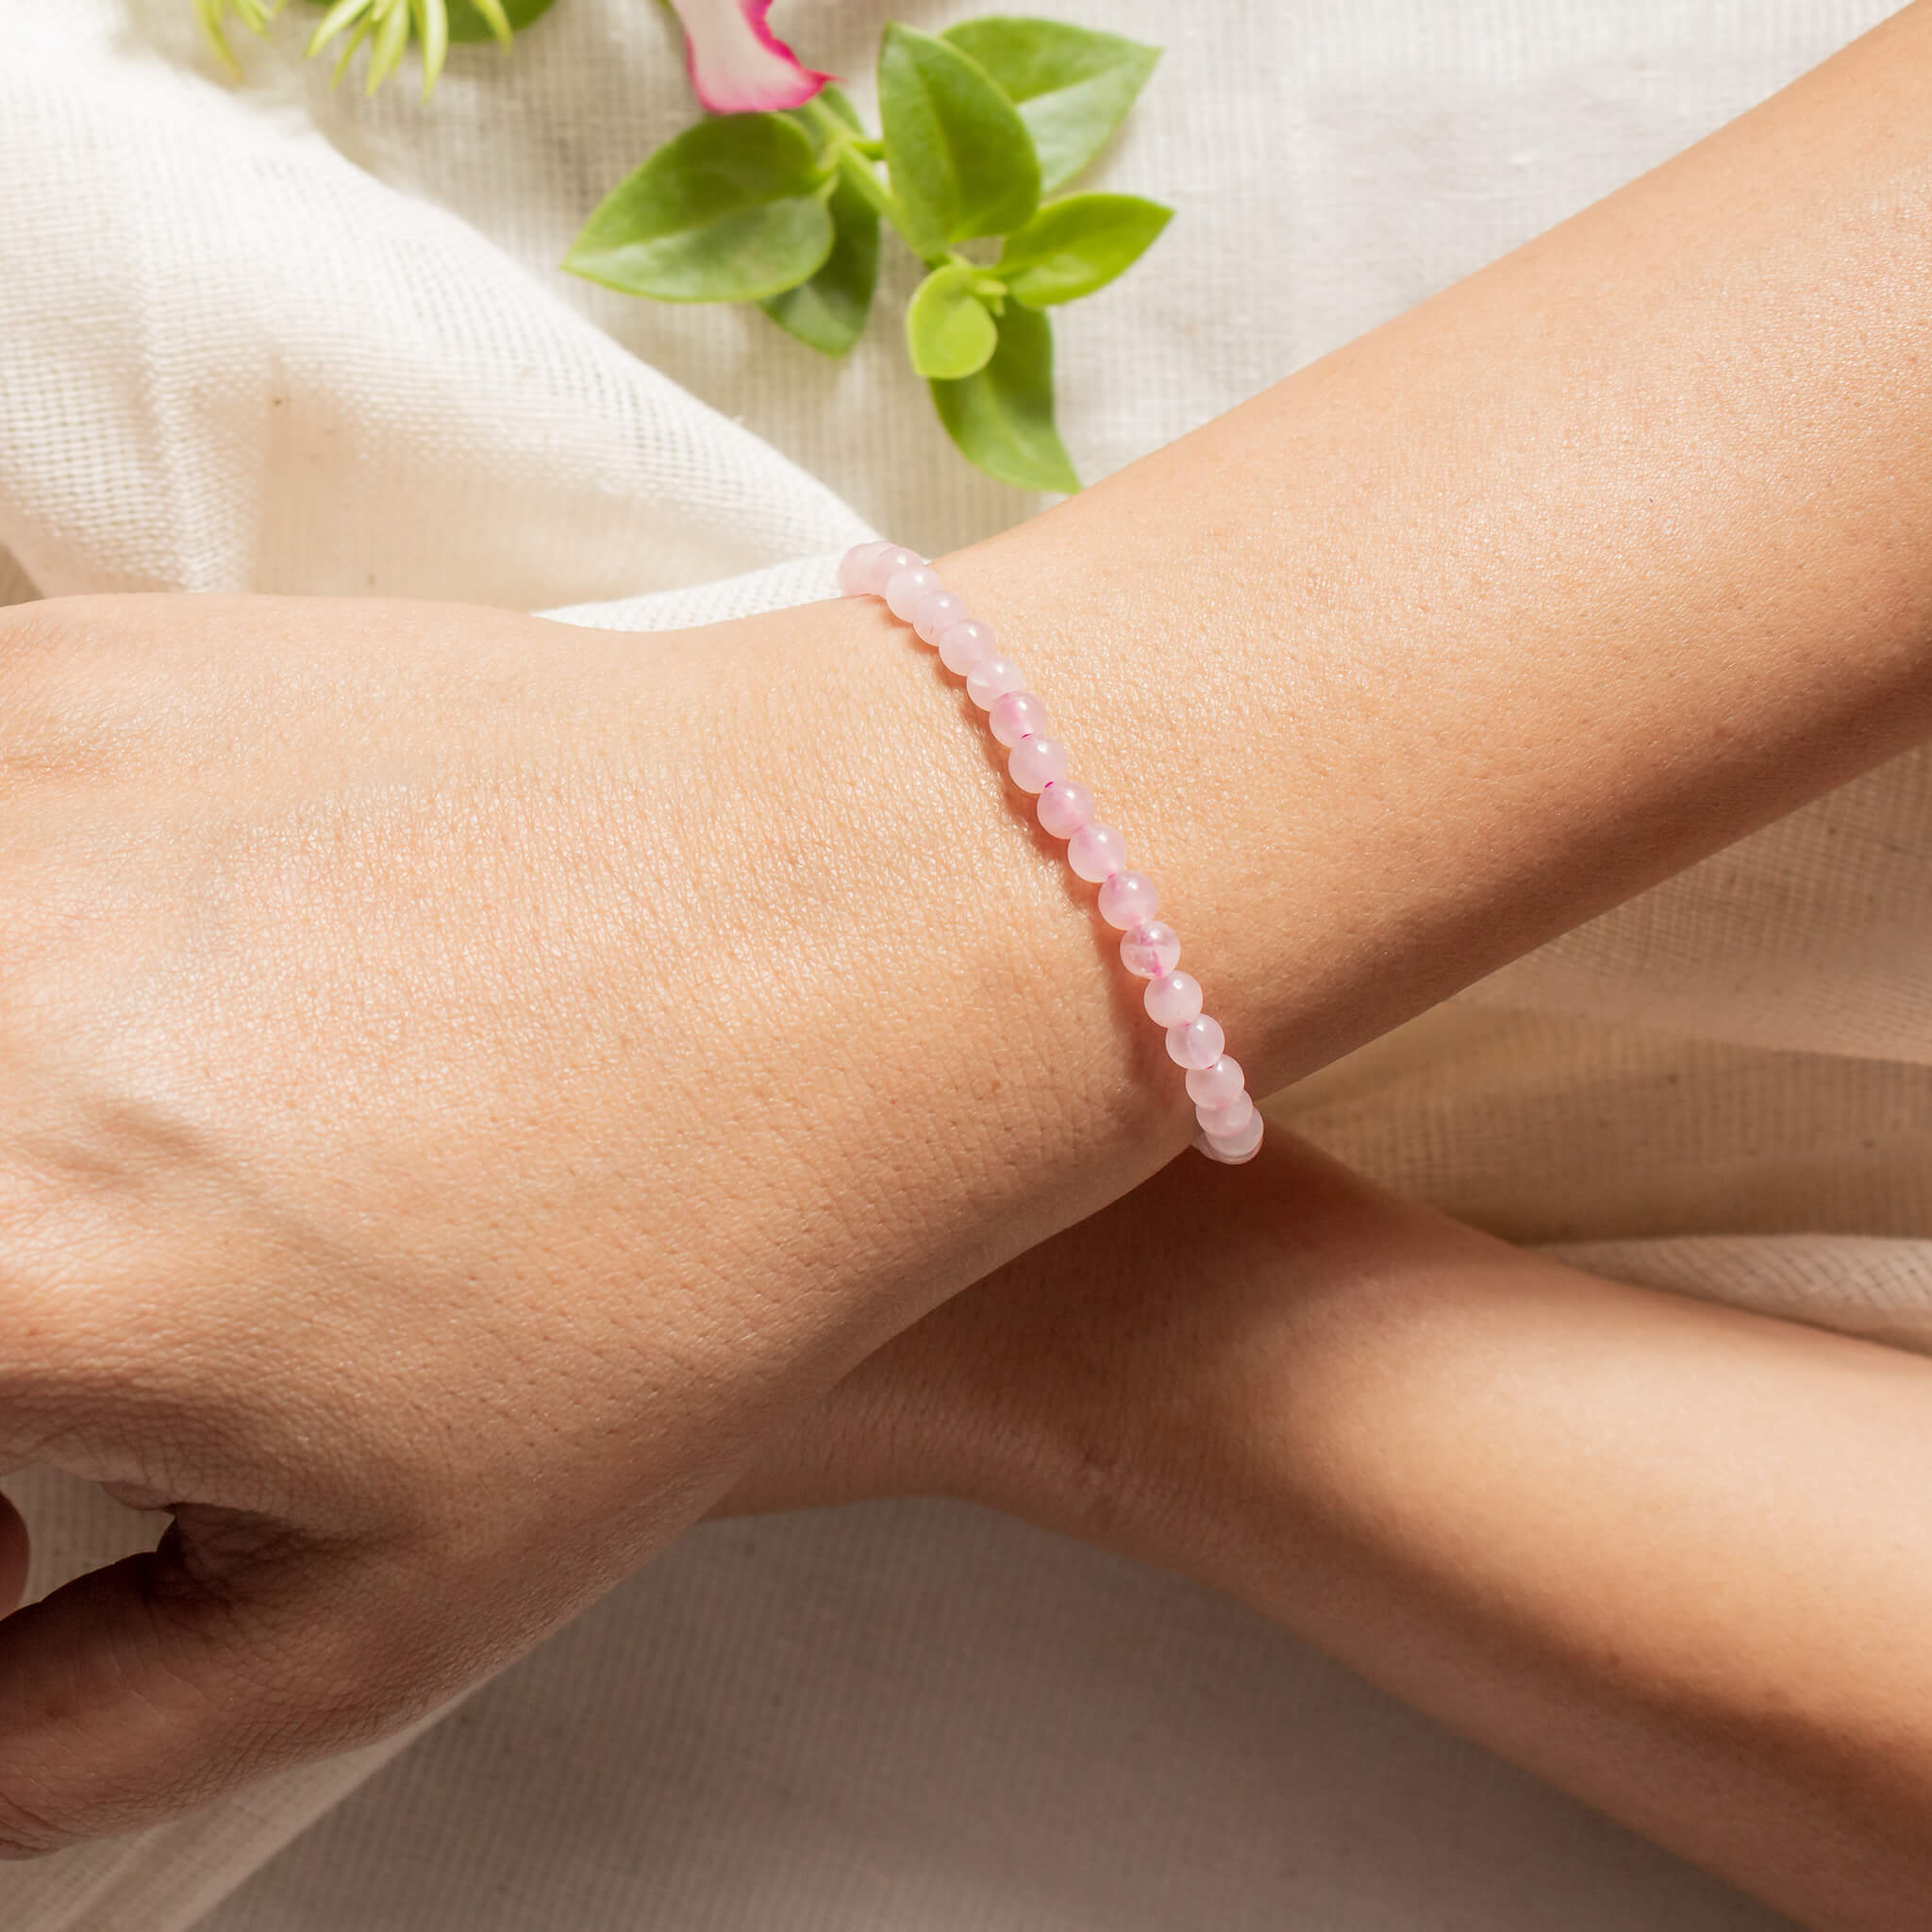 Crystal Bracelets: How to Wear, Use, Do's and Don'ts | AllCrystal